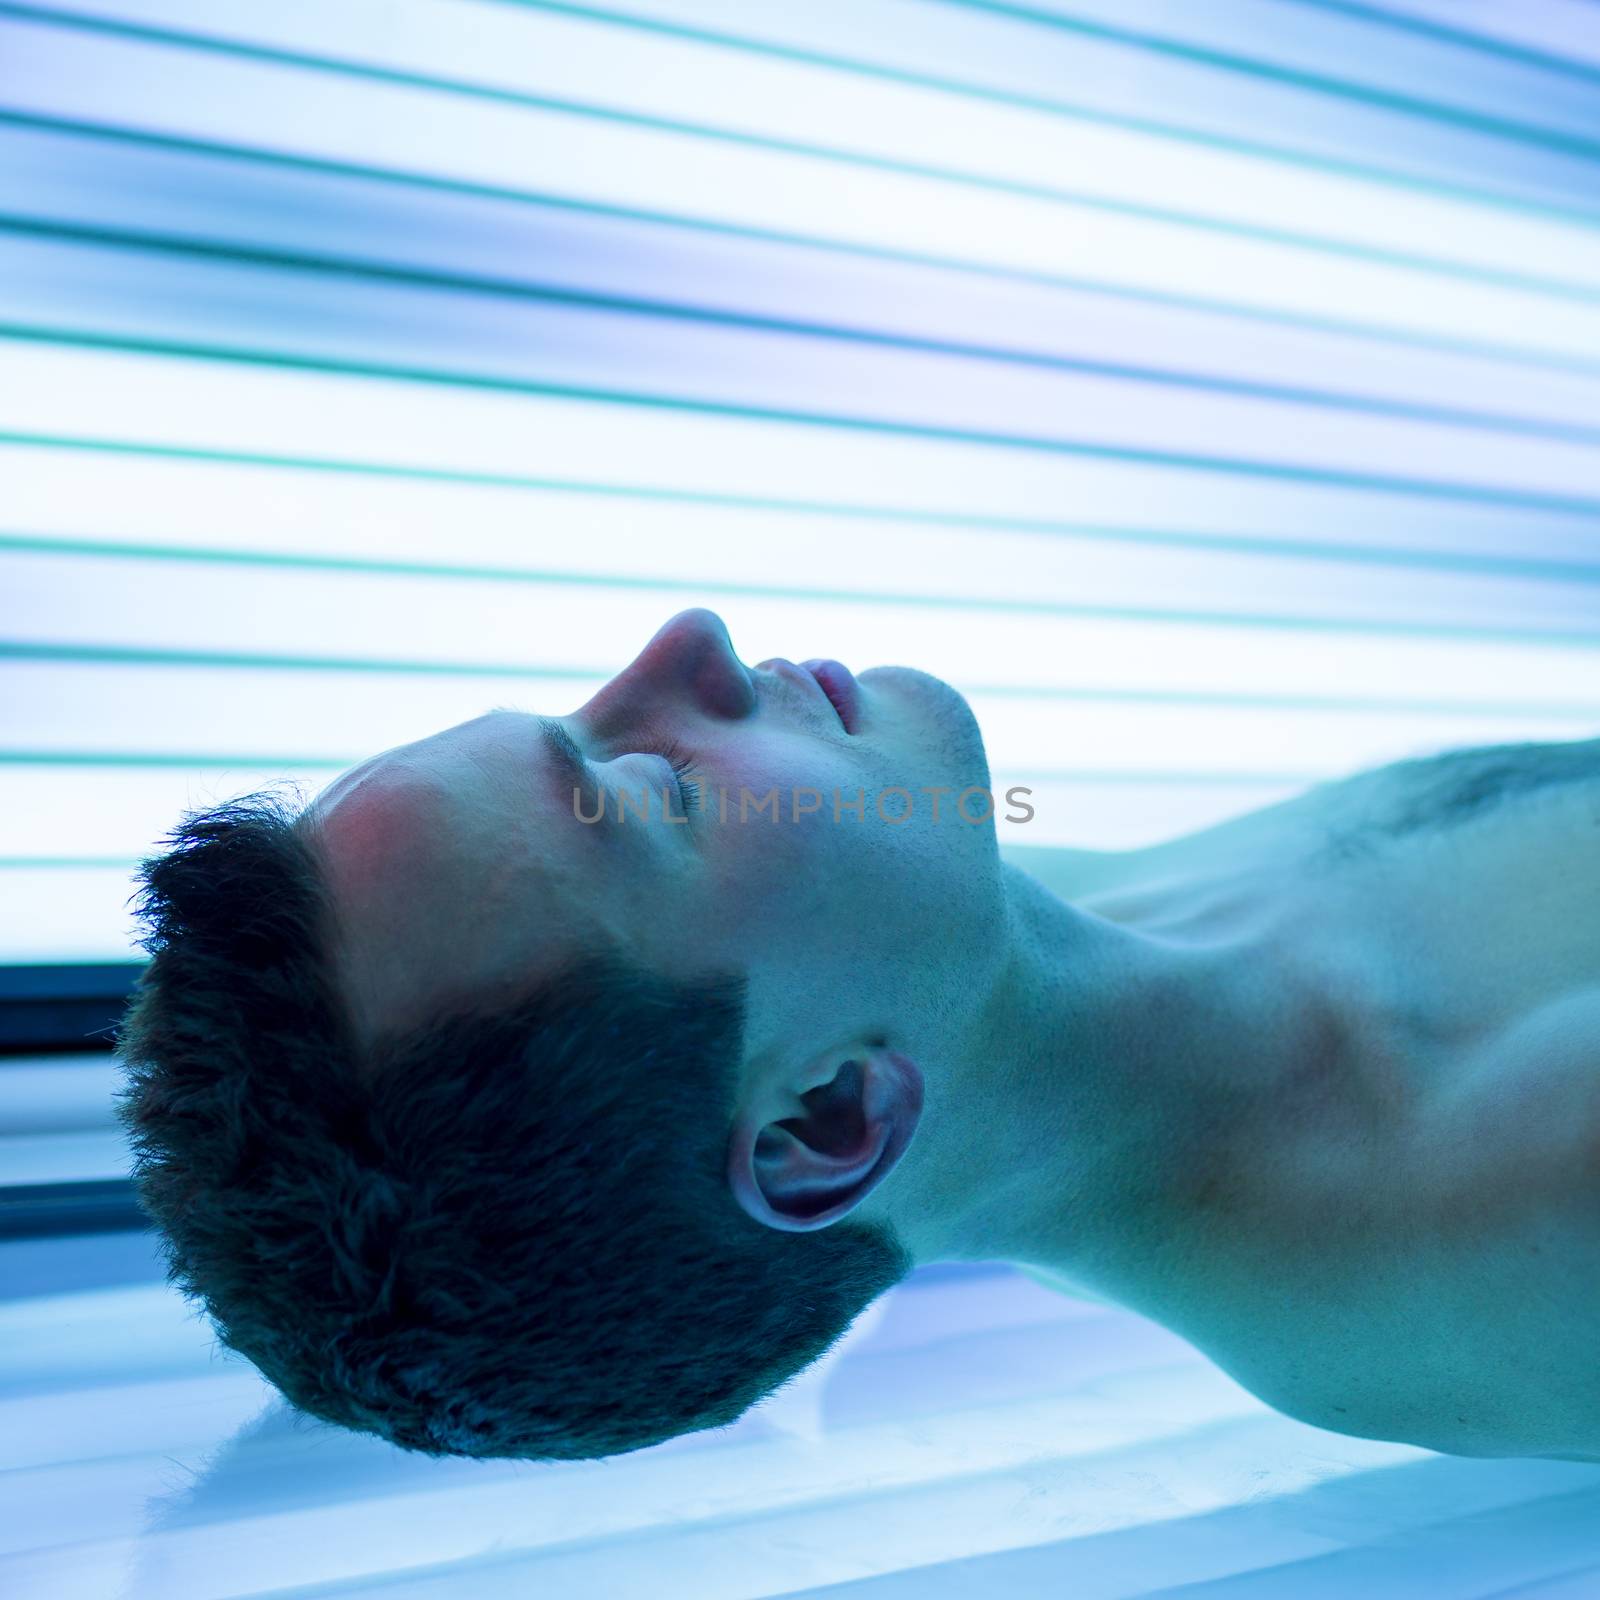 Handsome young man relaxing  in a modern solarium session in a modern by viktor_cap